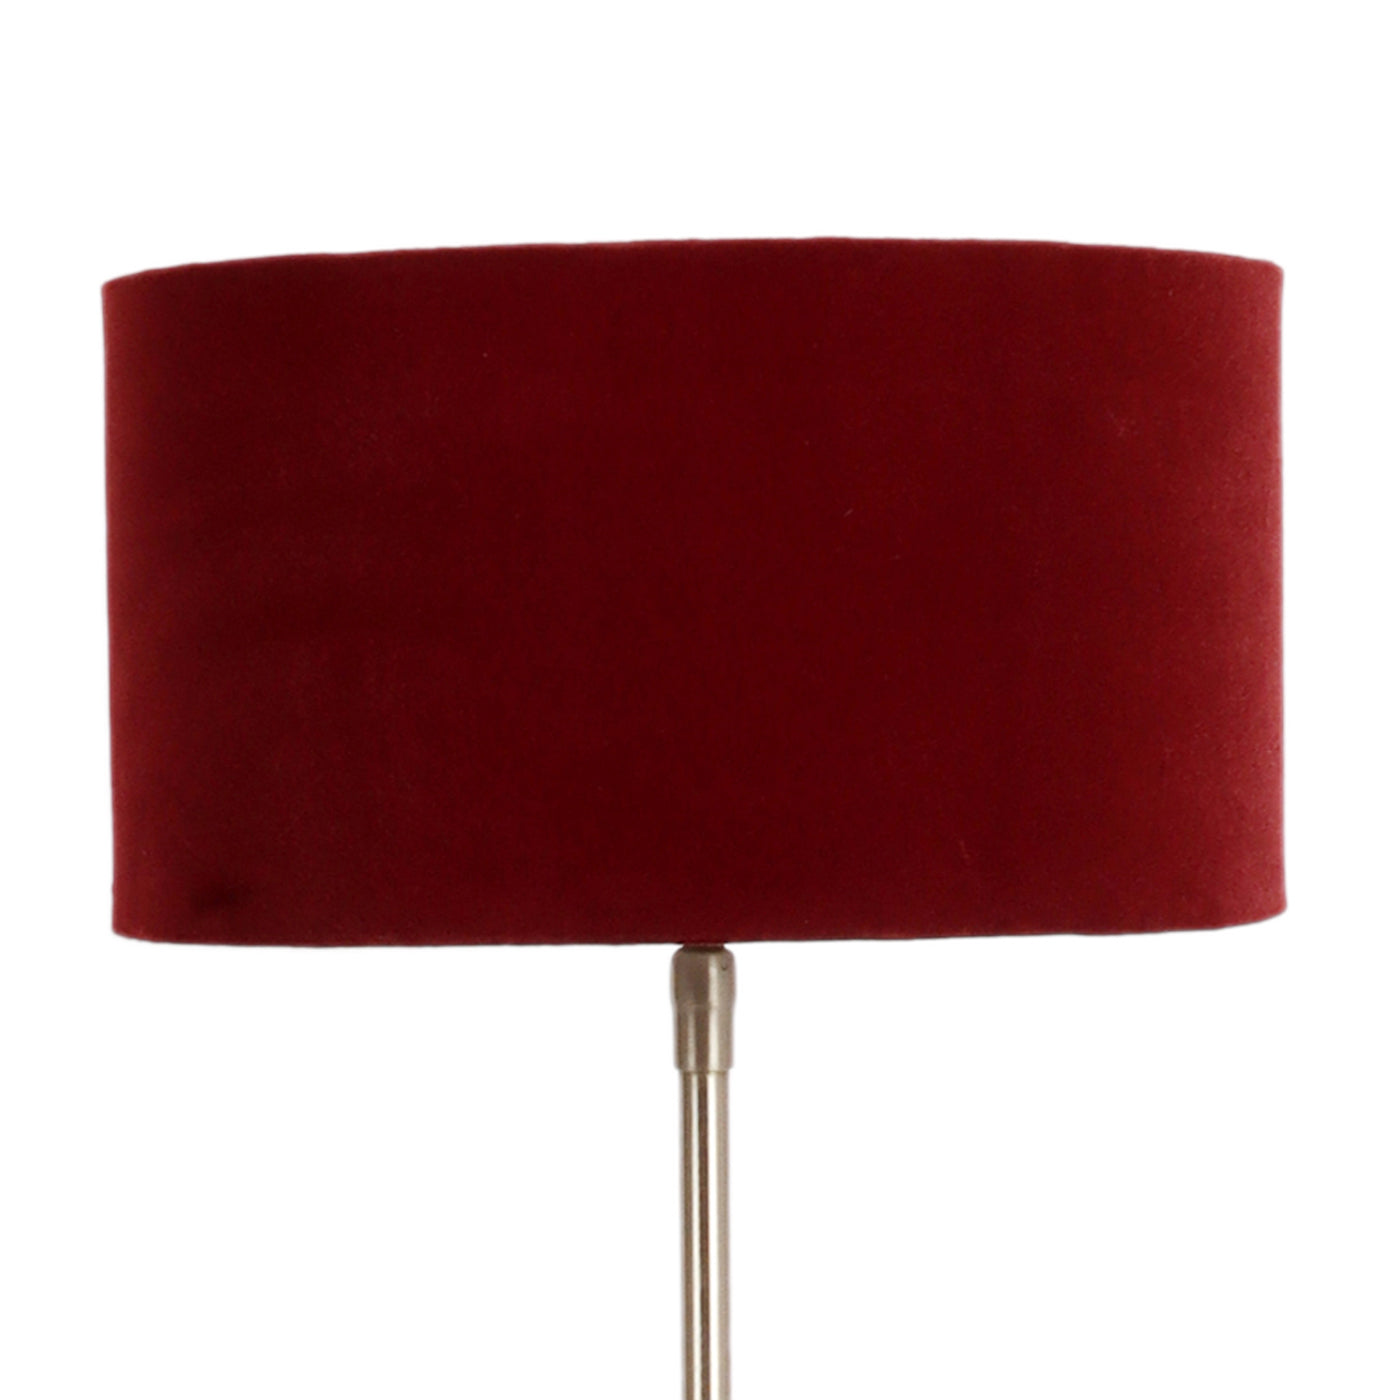 The "Large Silver MJ  Lamp" with Red velvet shade